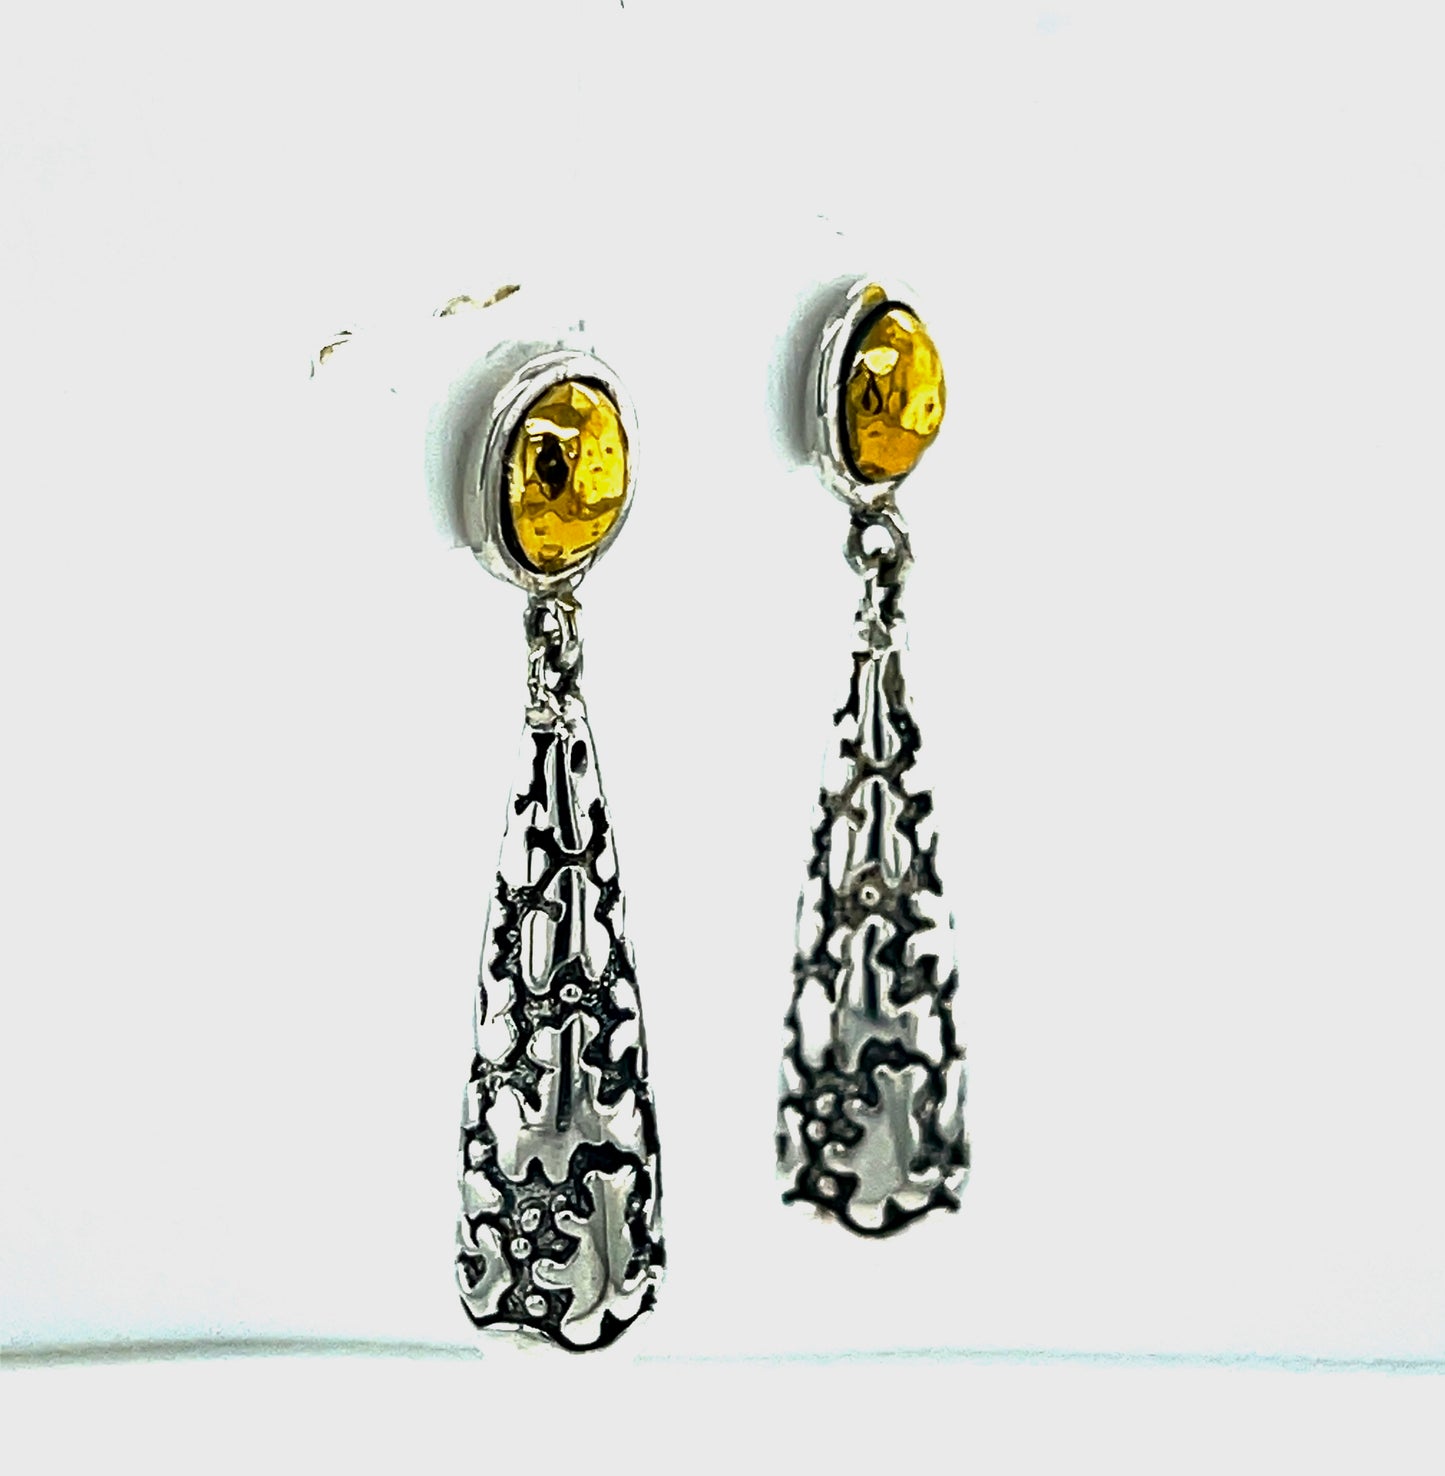 18kt Gold and Silver earrings